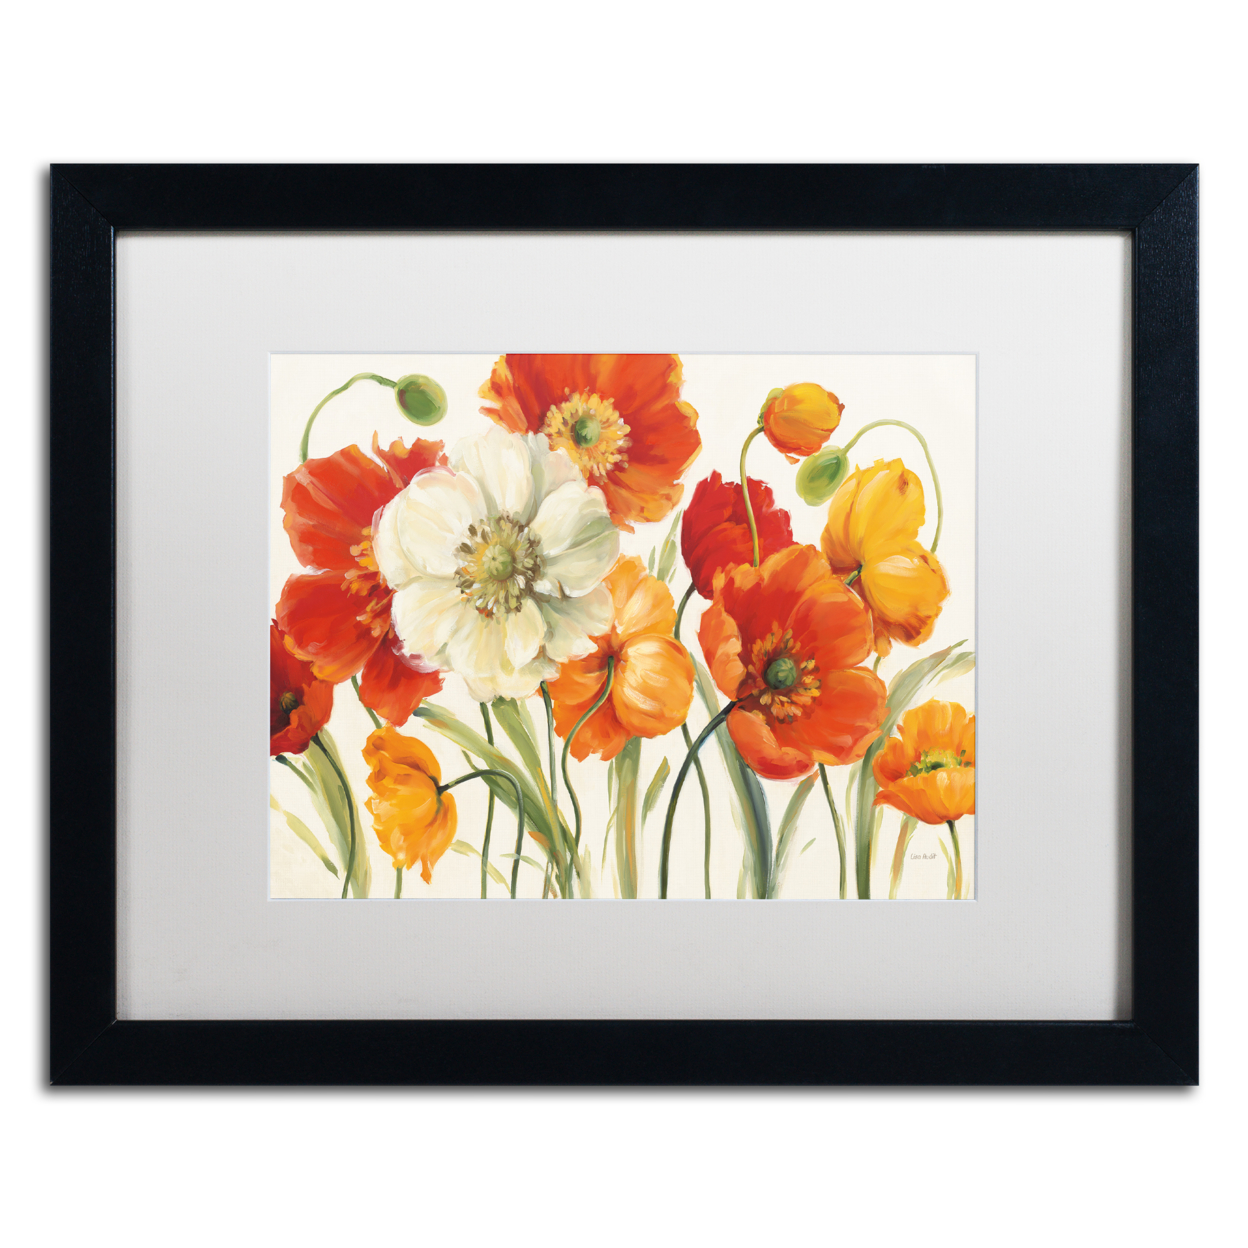 Lisa Audit 'Poppies Melody I' Black Wooden Framed Art 18 X 22 Inches